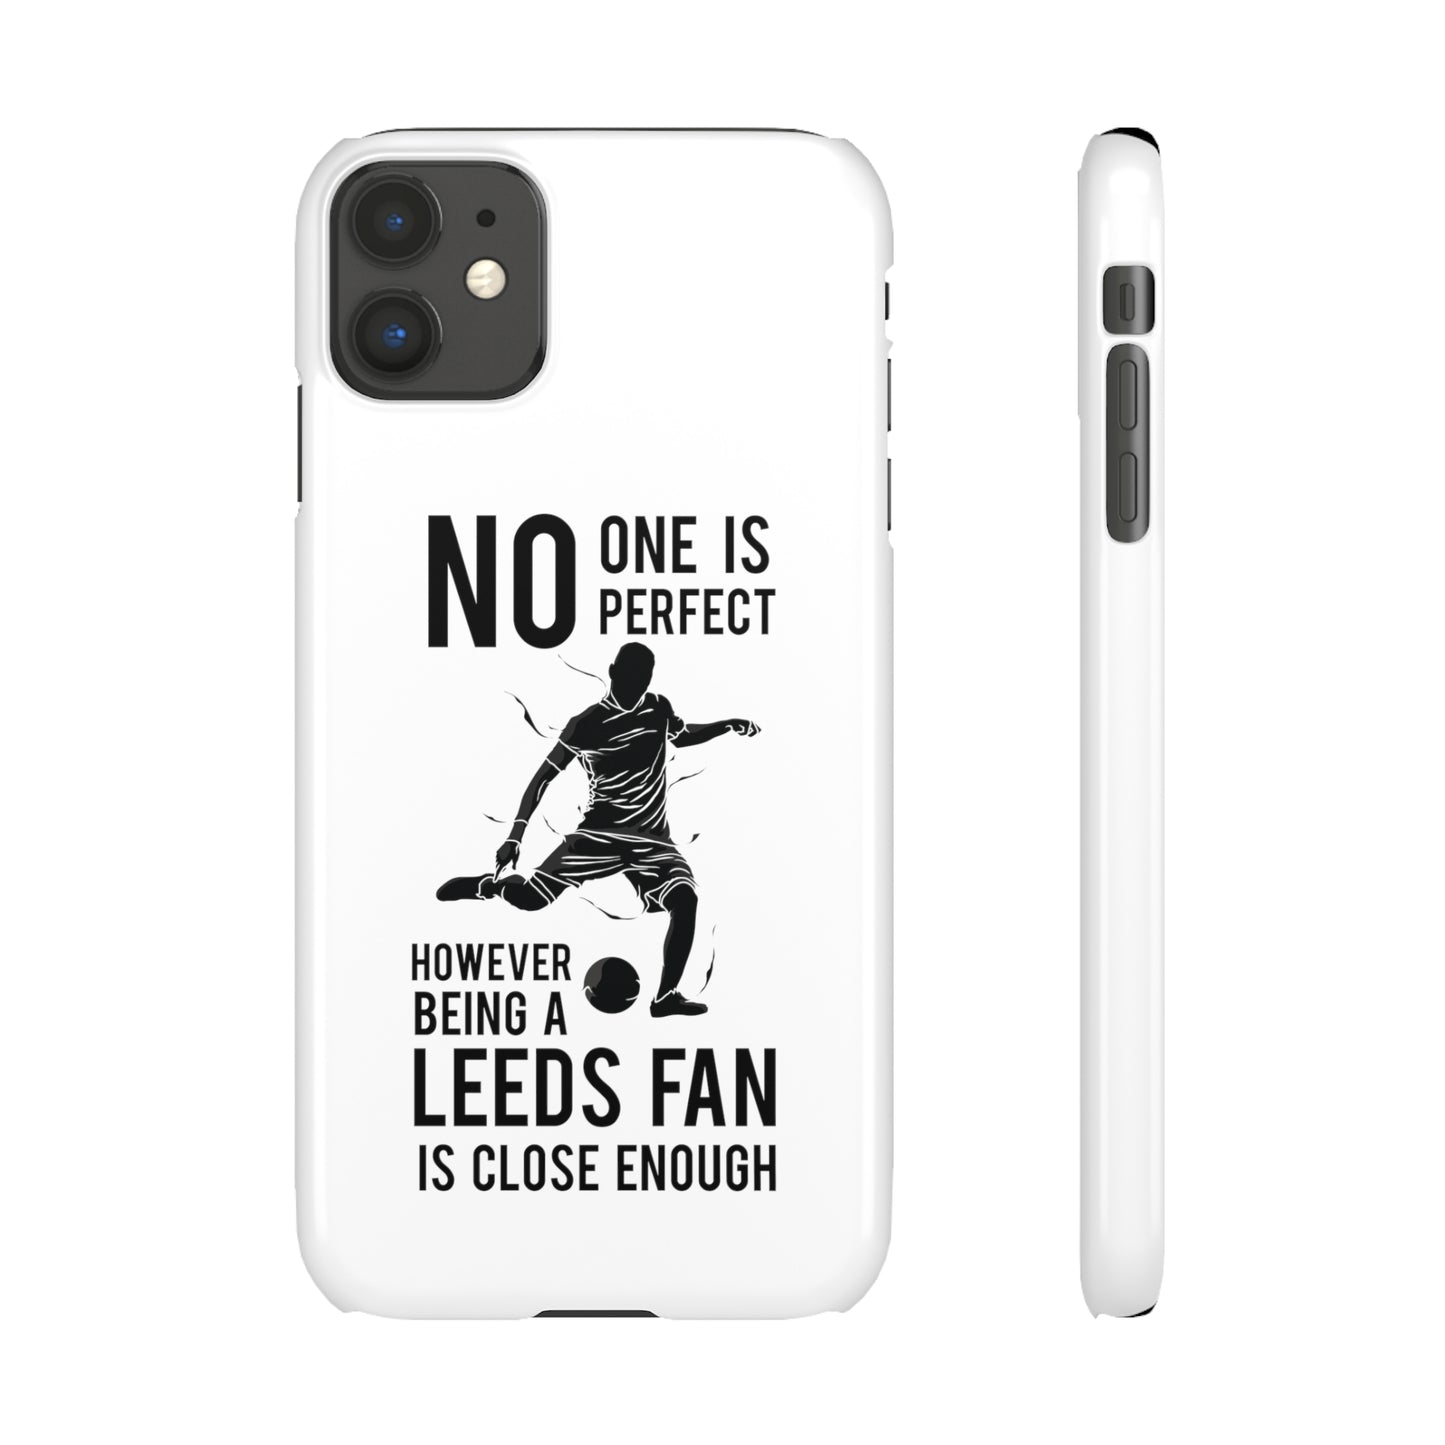 Snap Cases - No One Is Perfect However Being A Leeds Fan Is Close Enough